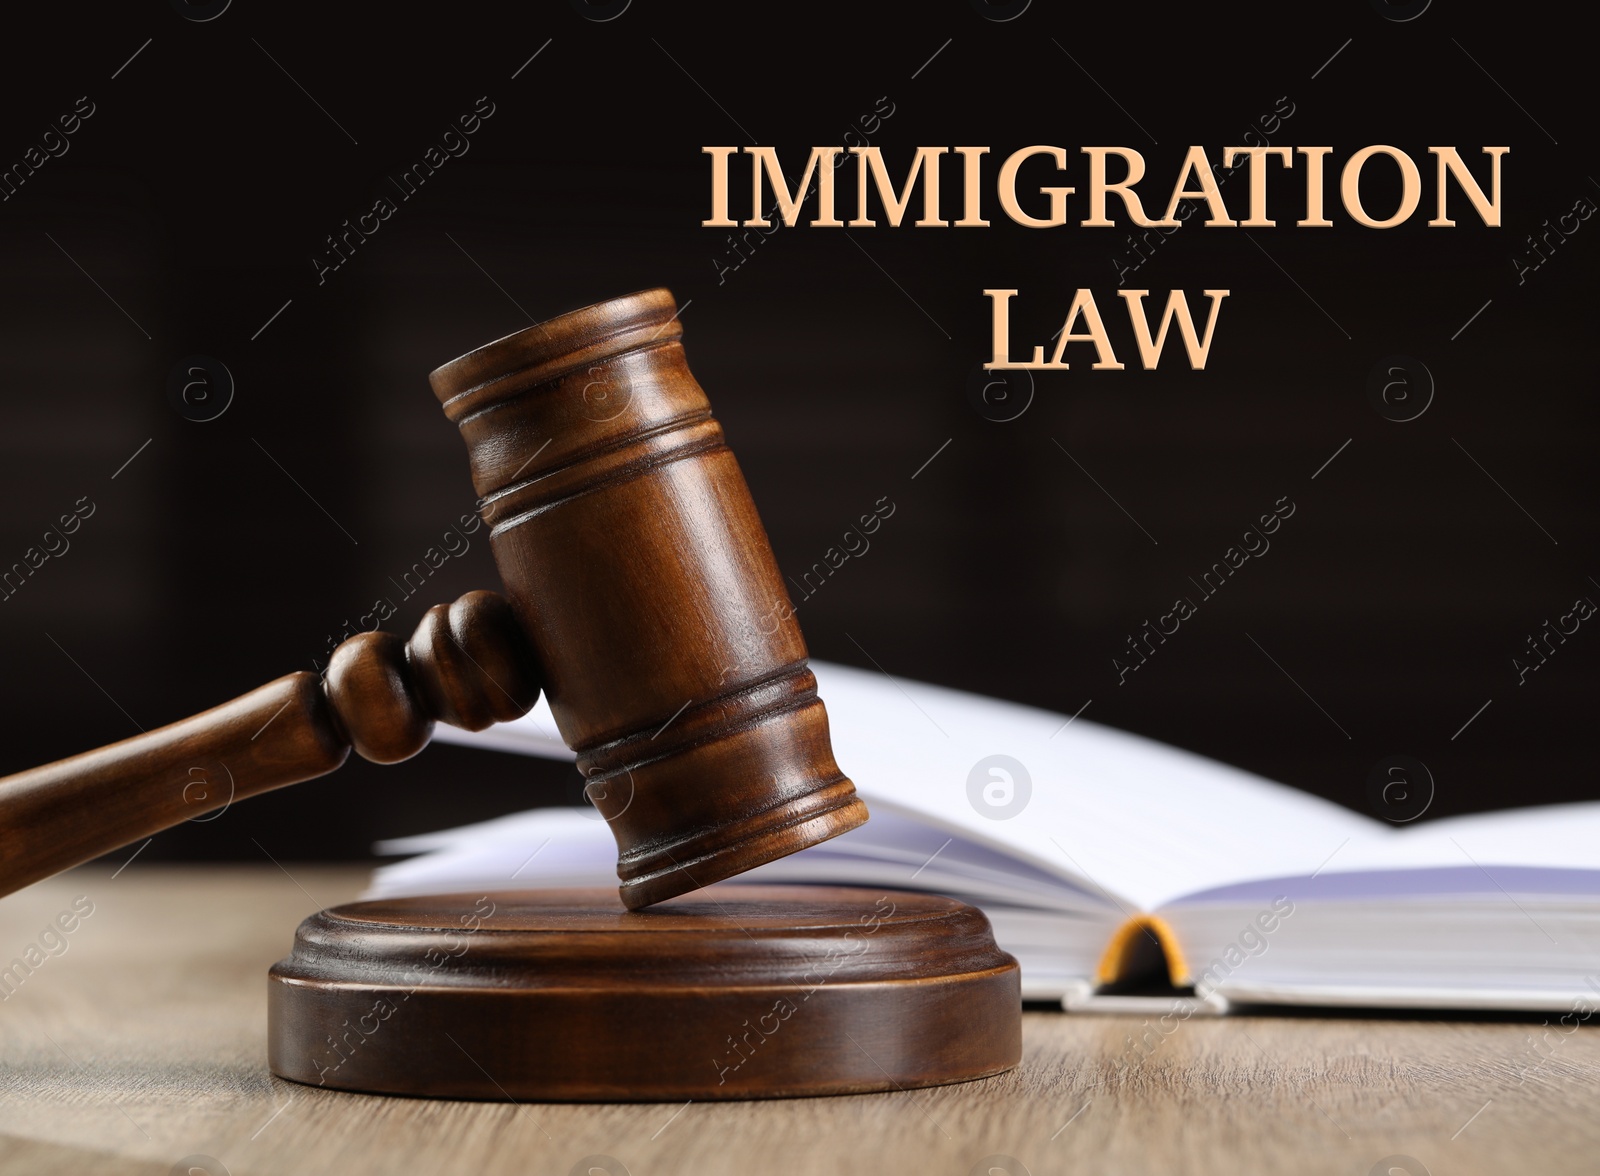 Image of Immigration law. Wooden gavel and open book on table